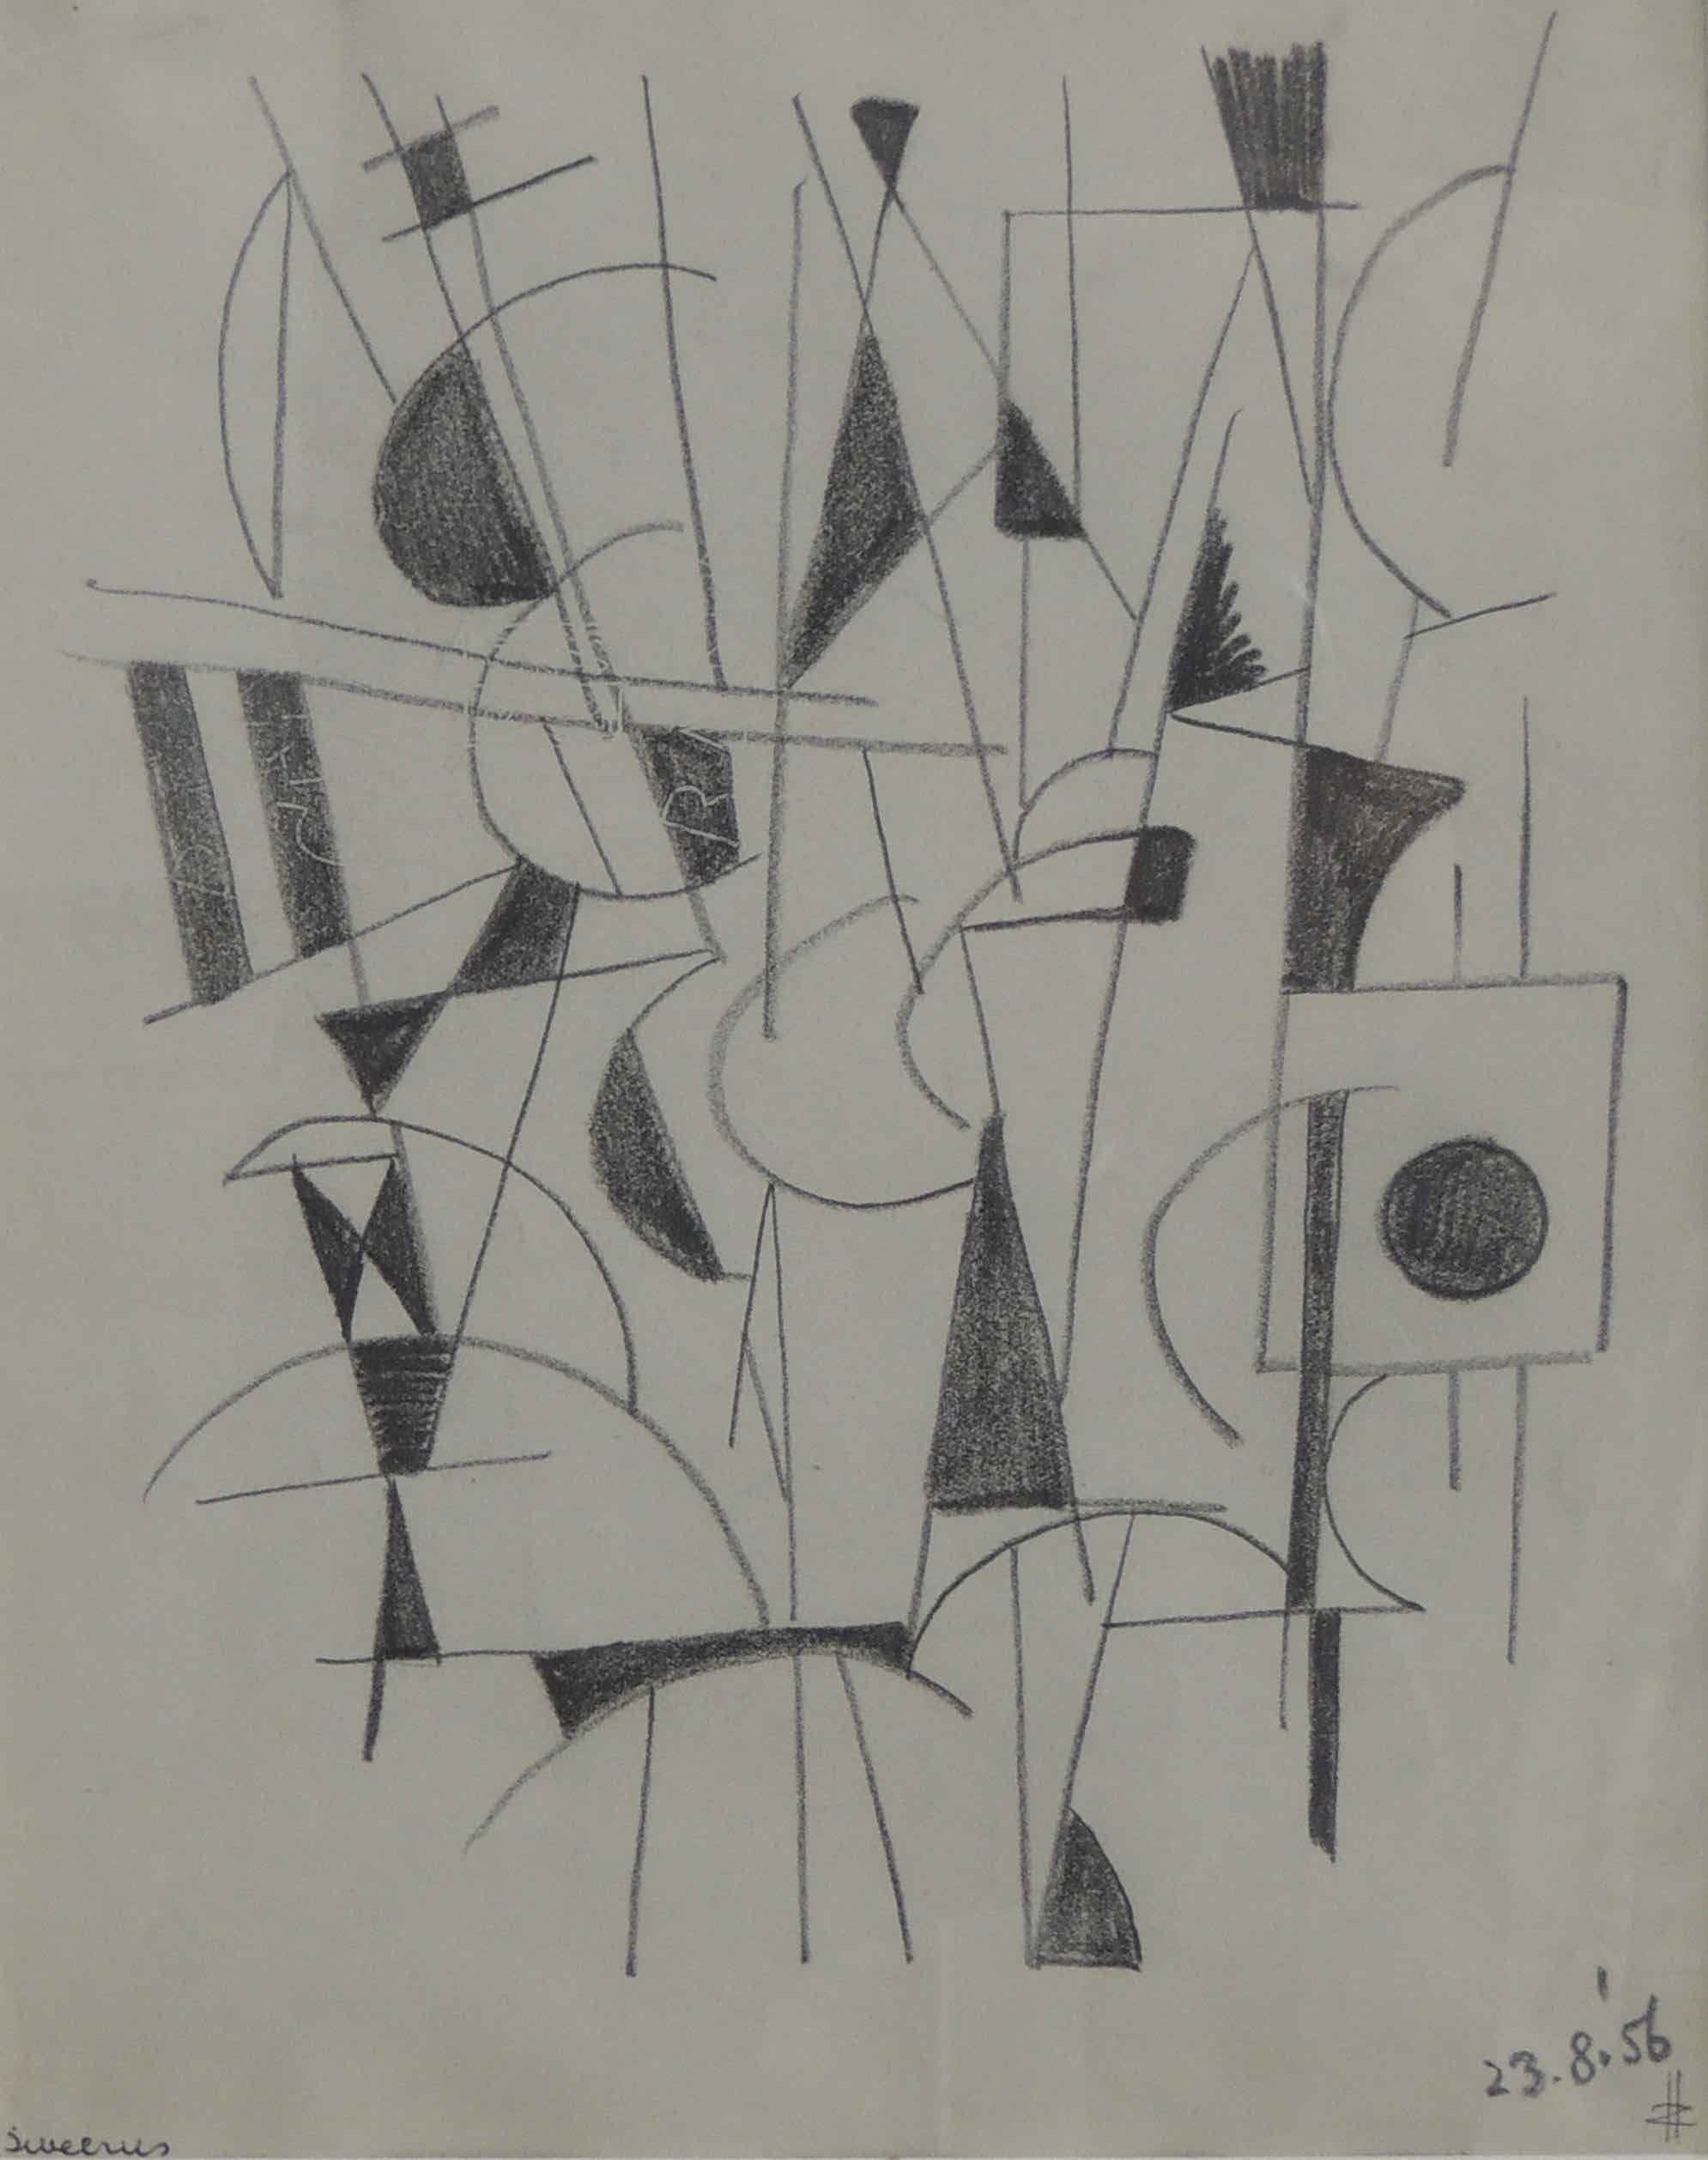 'No Title' by Henk Zweerus in 1956